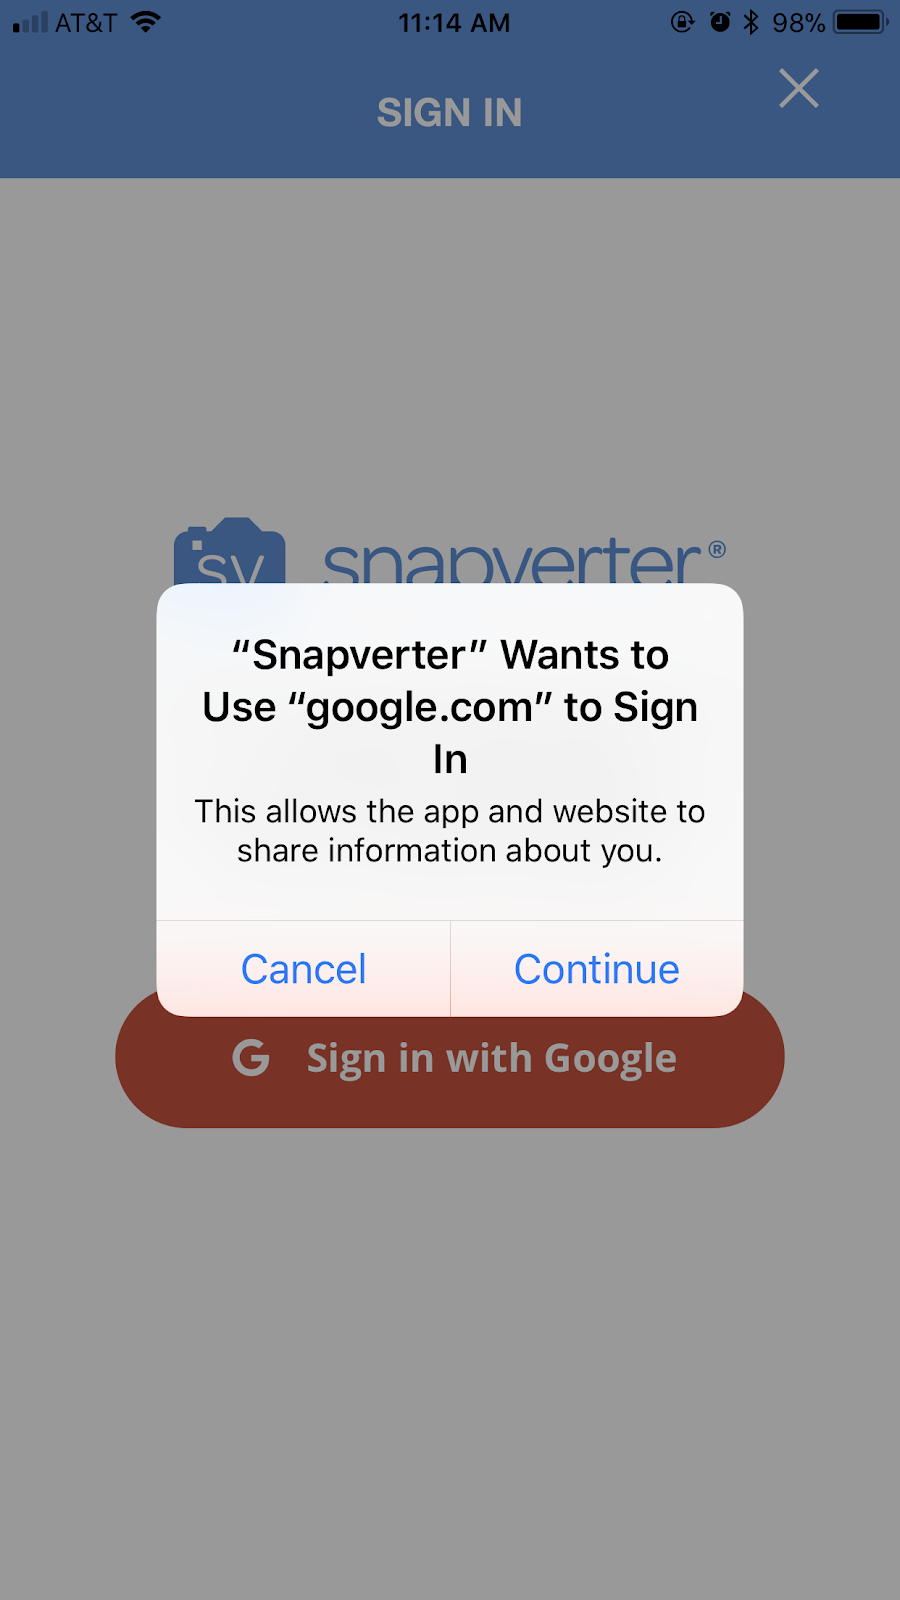 Snapverter wants to use google.com to sign in